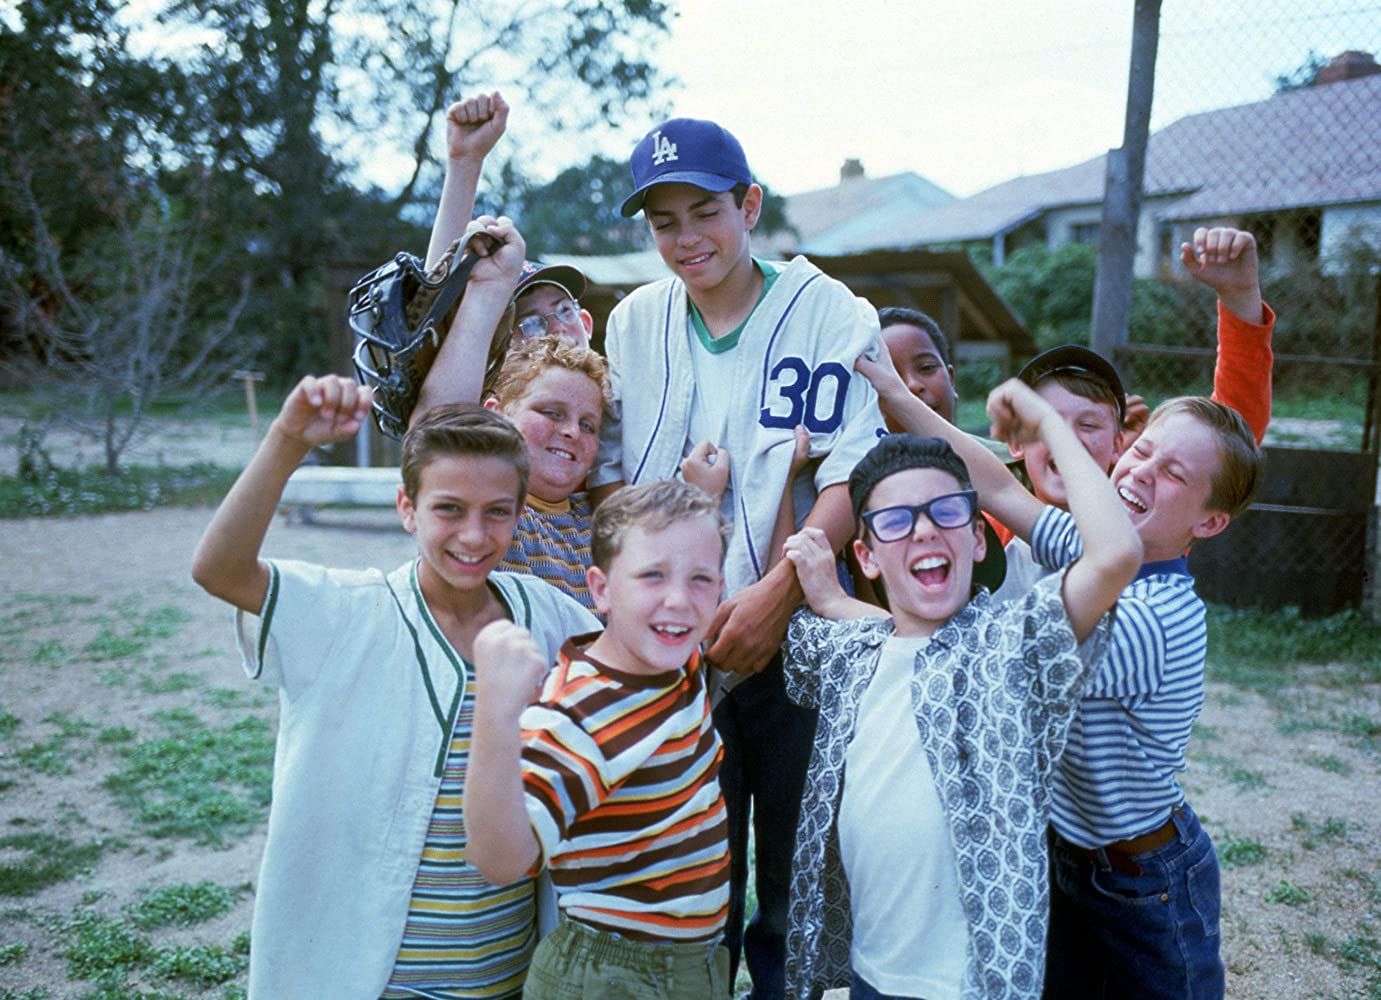 Kids from The Sandlot cheering